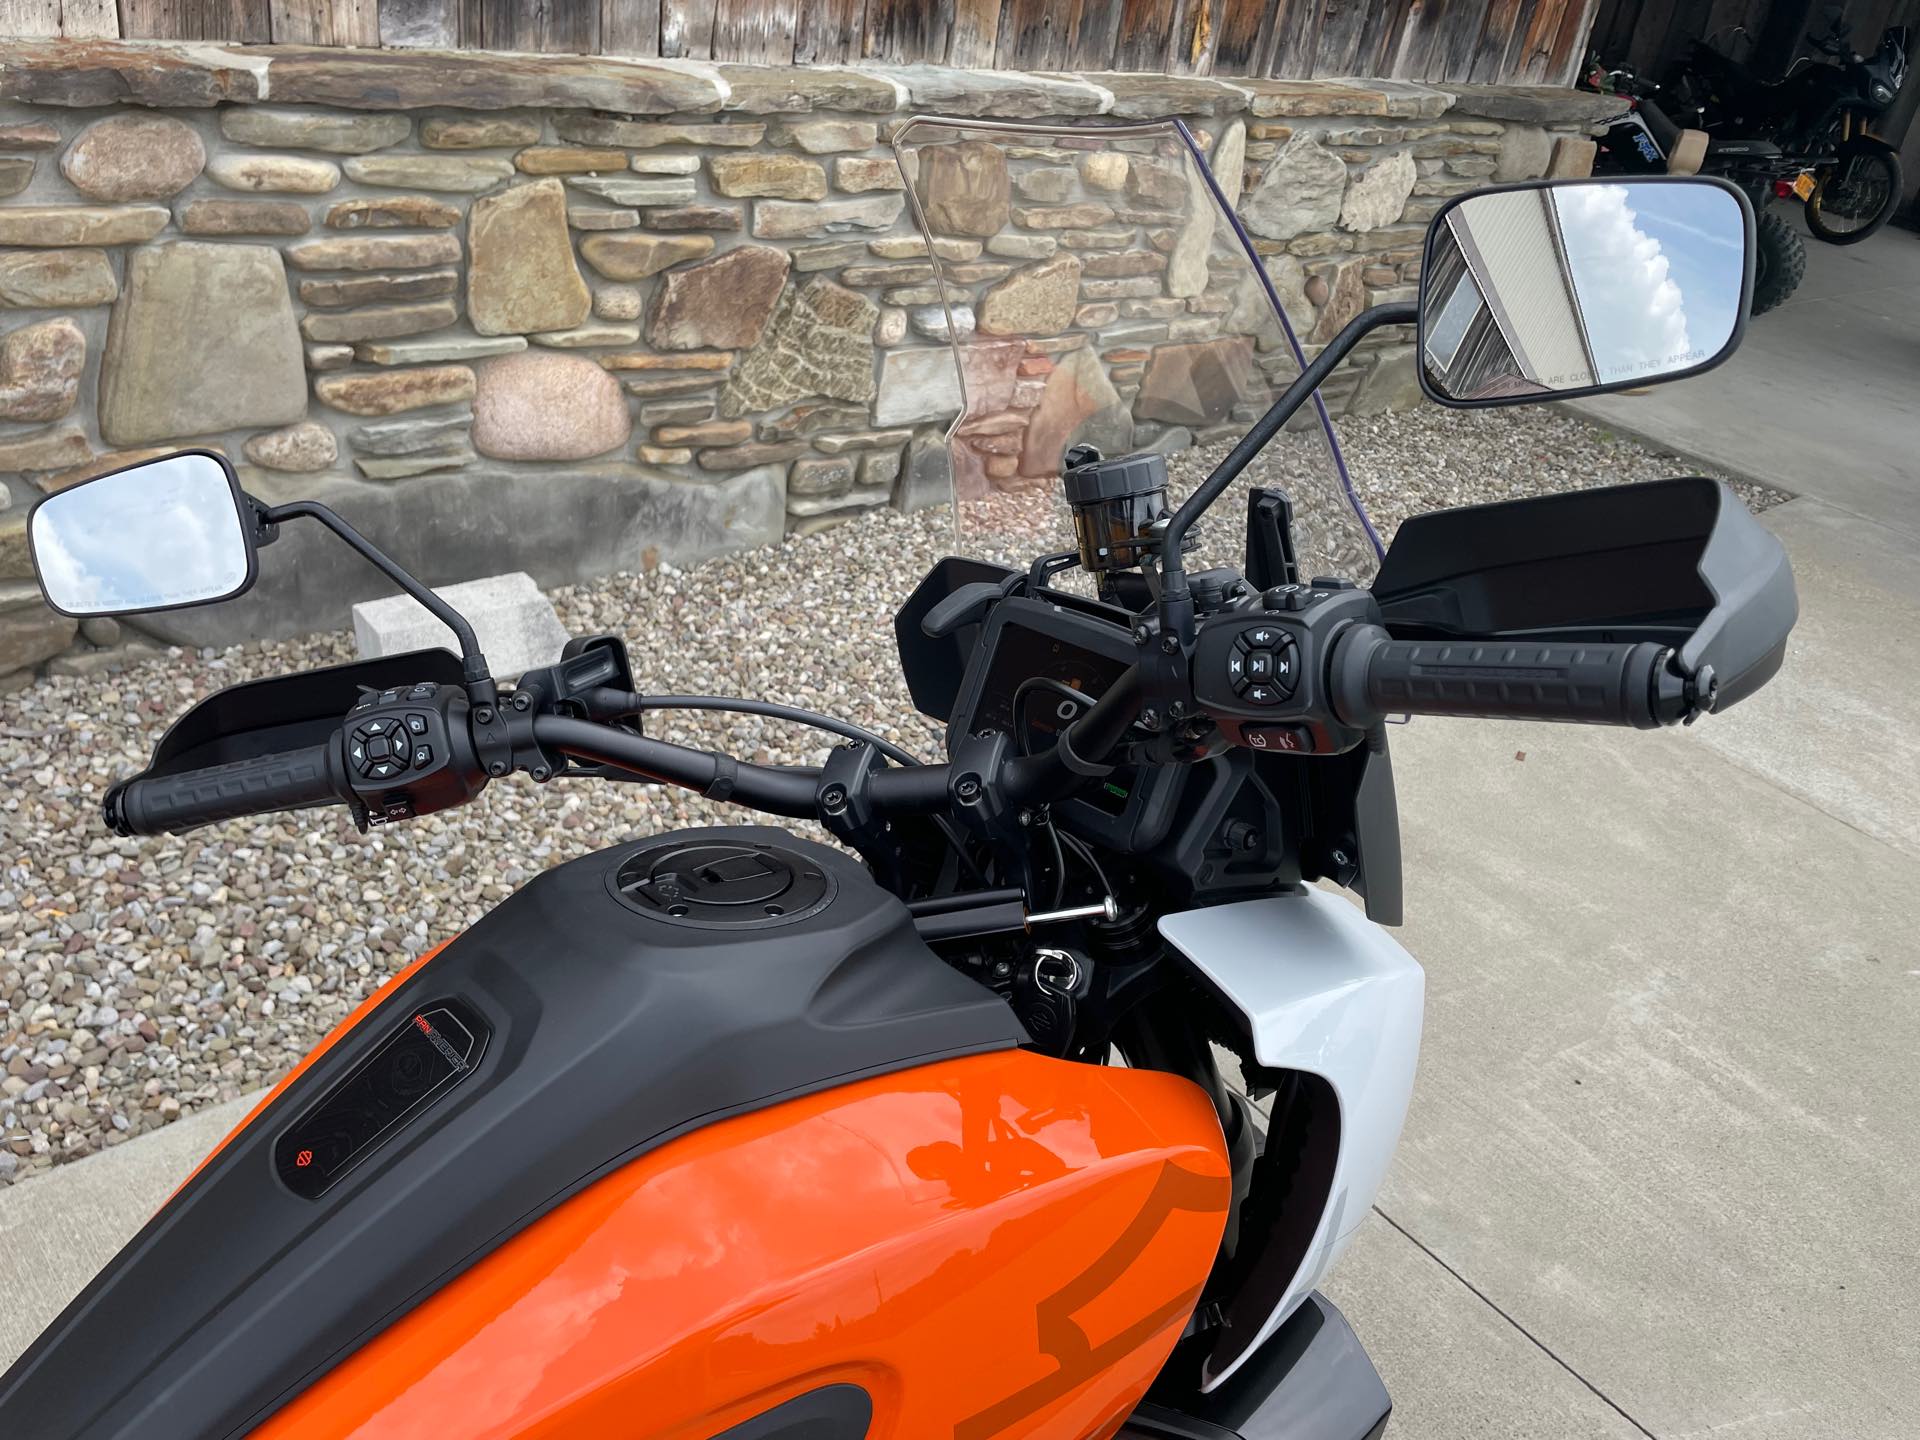 2021 Harley-Davidson Adventure Touring Pan America 1250 Special at Arkport Cycles